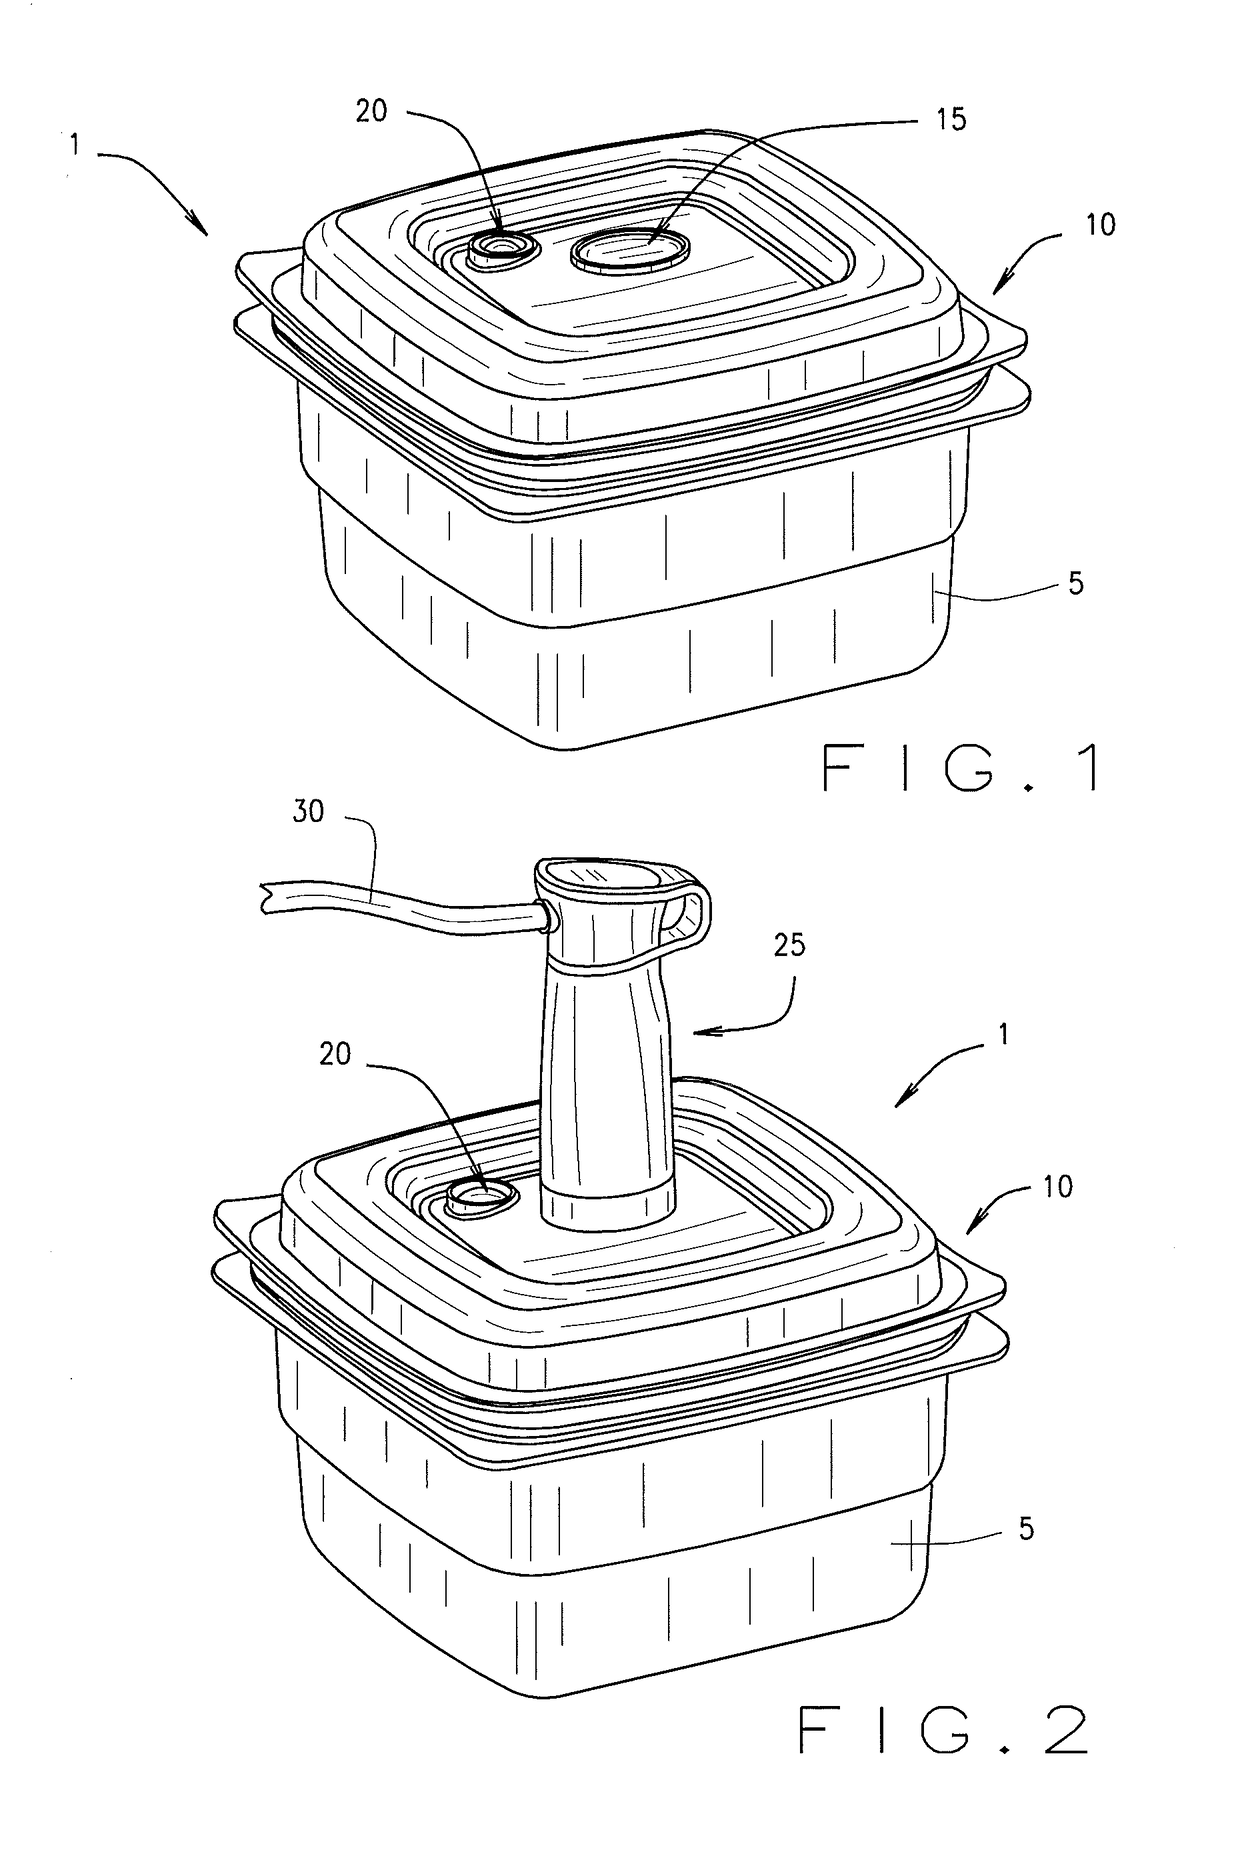 Valve assembly for a food storage container